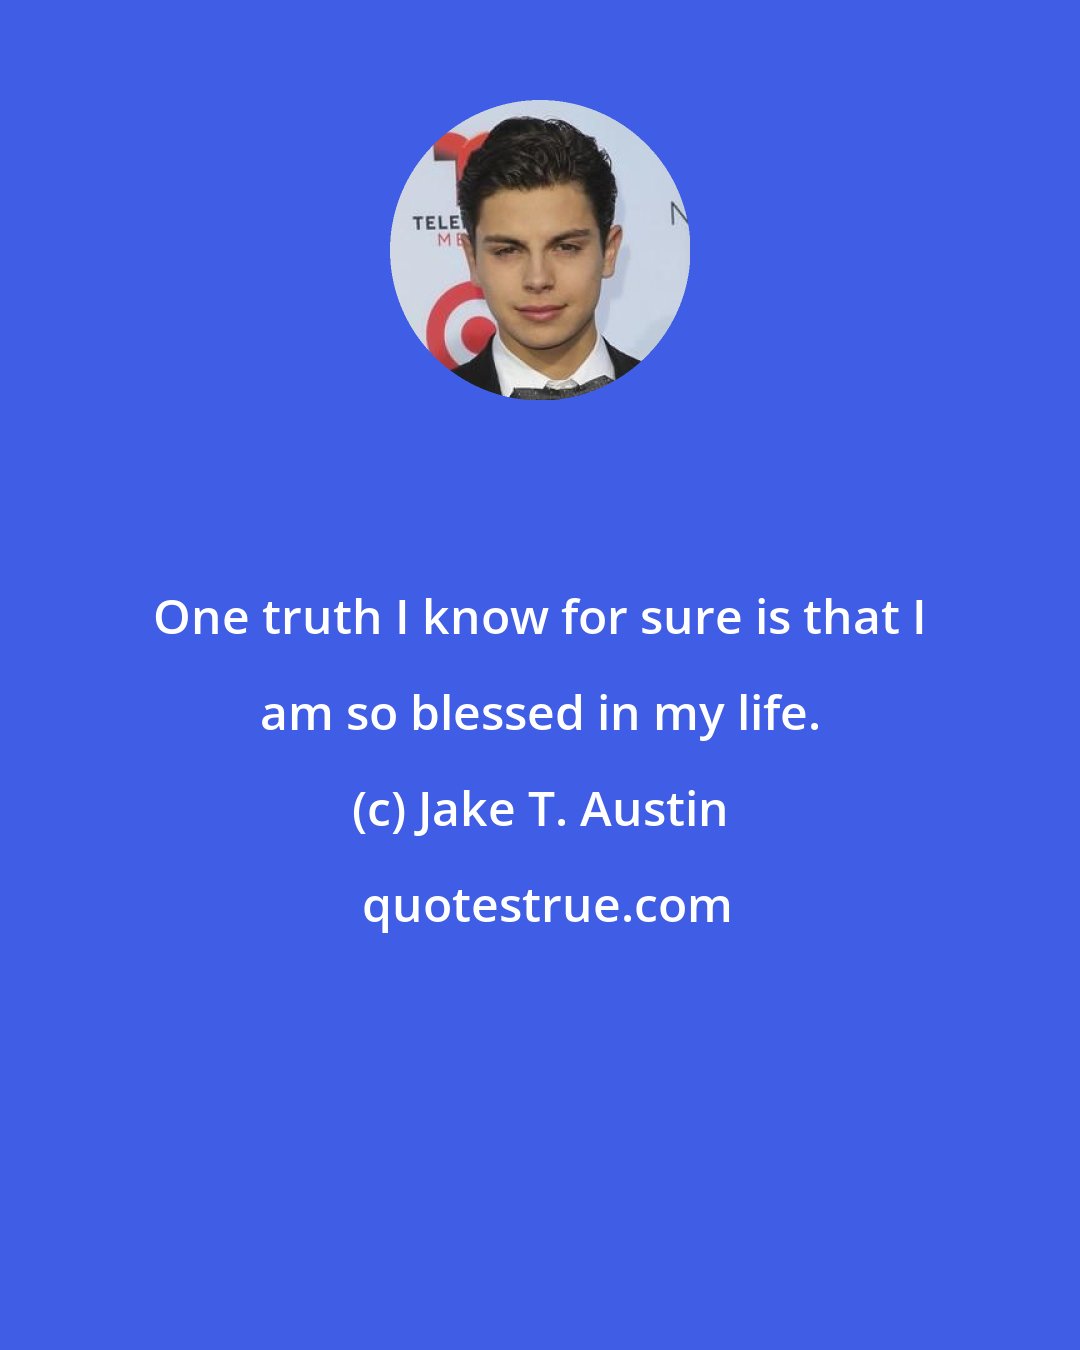 Jake T. Austin: One truth I know for sure is that I am so blessed in my life.